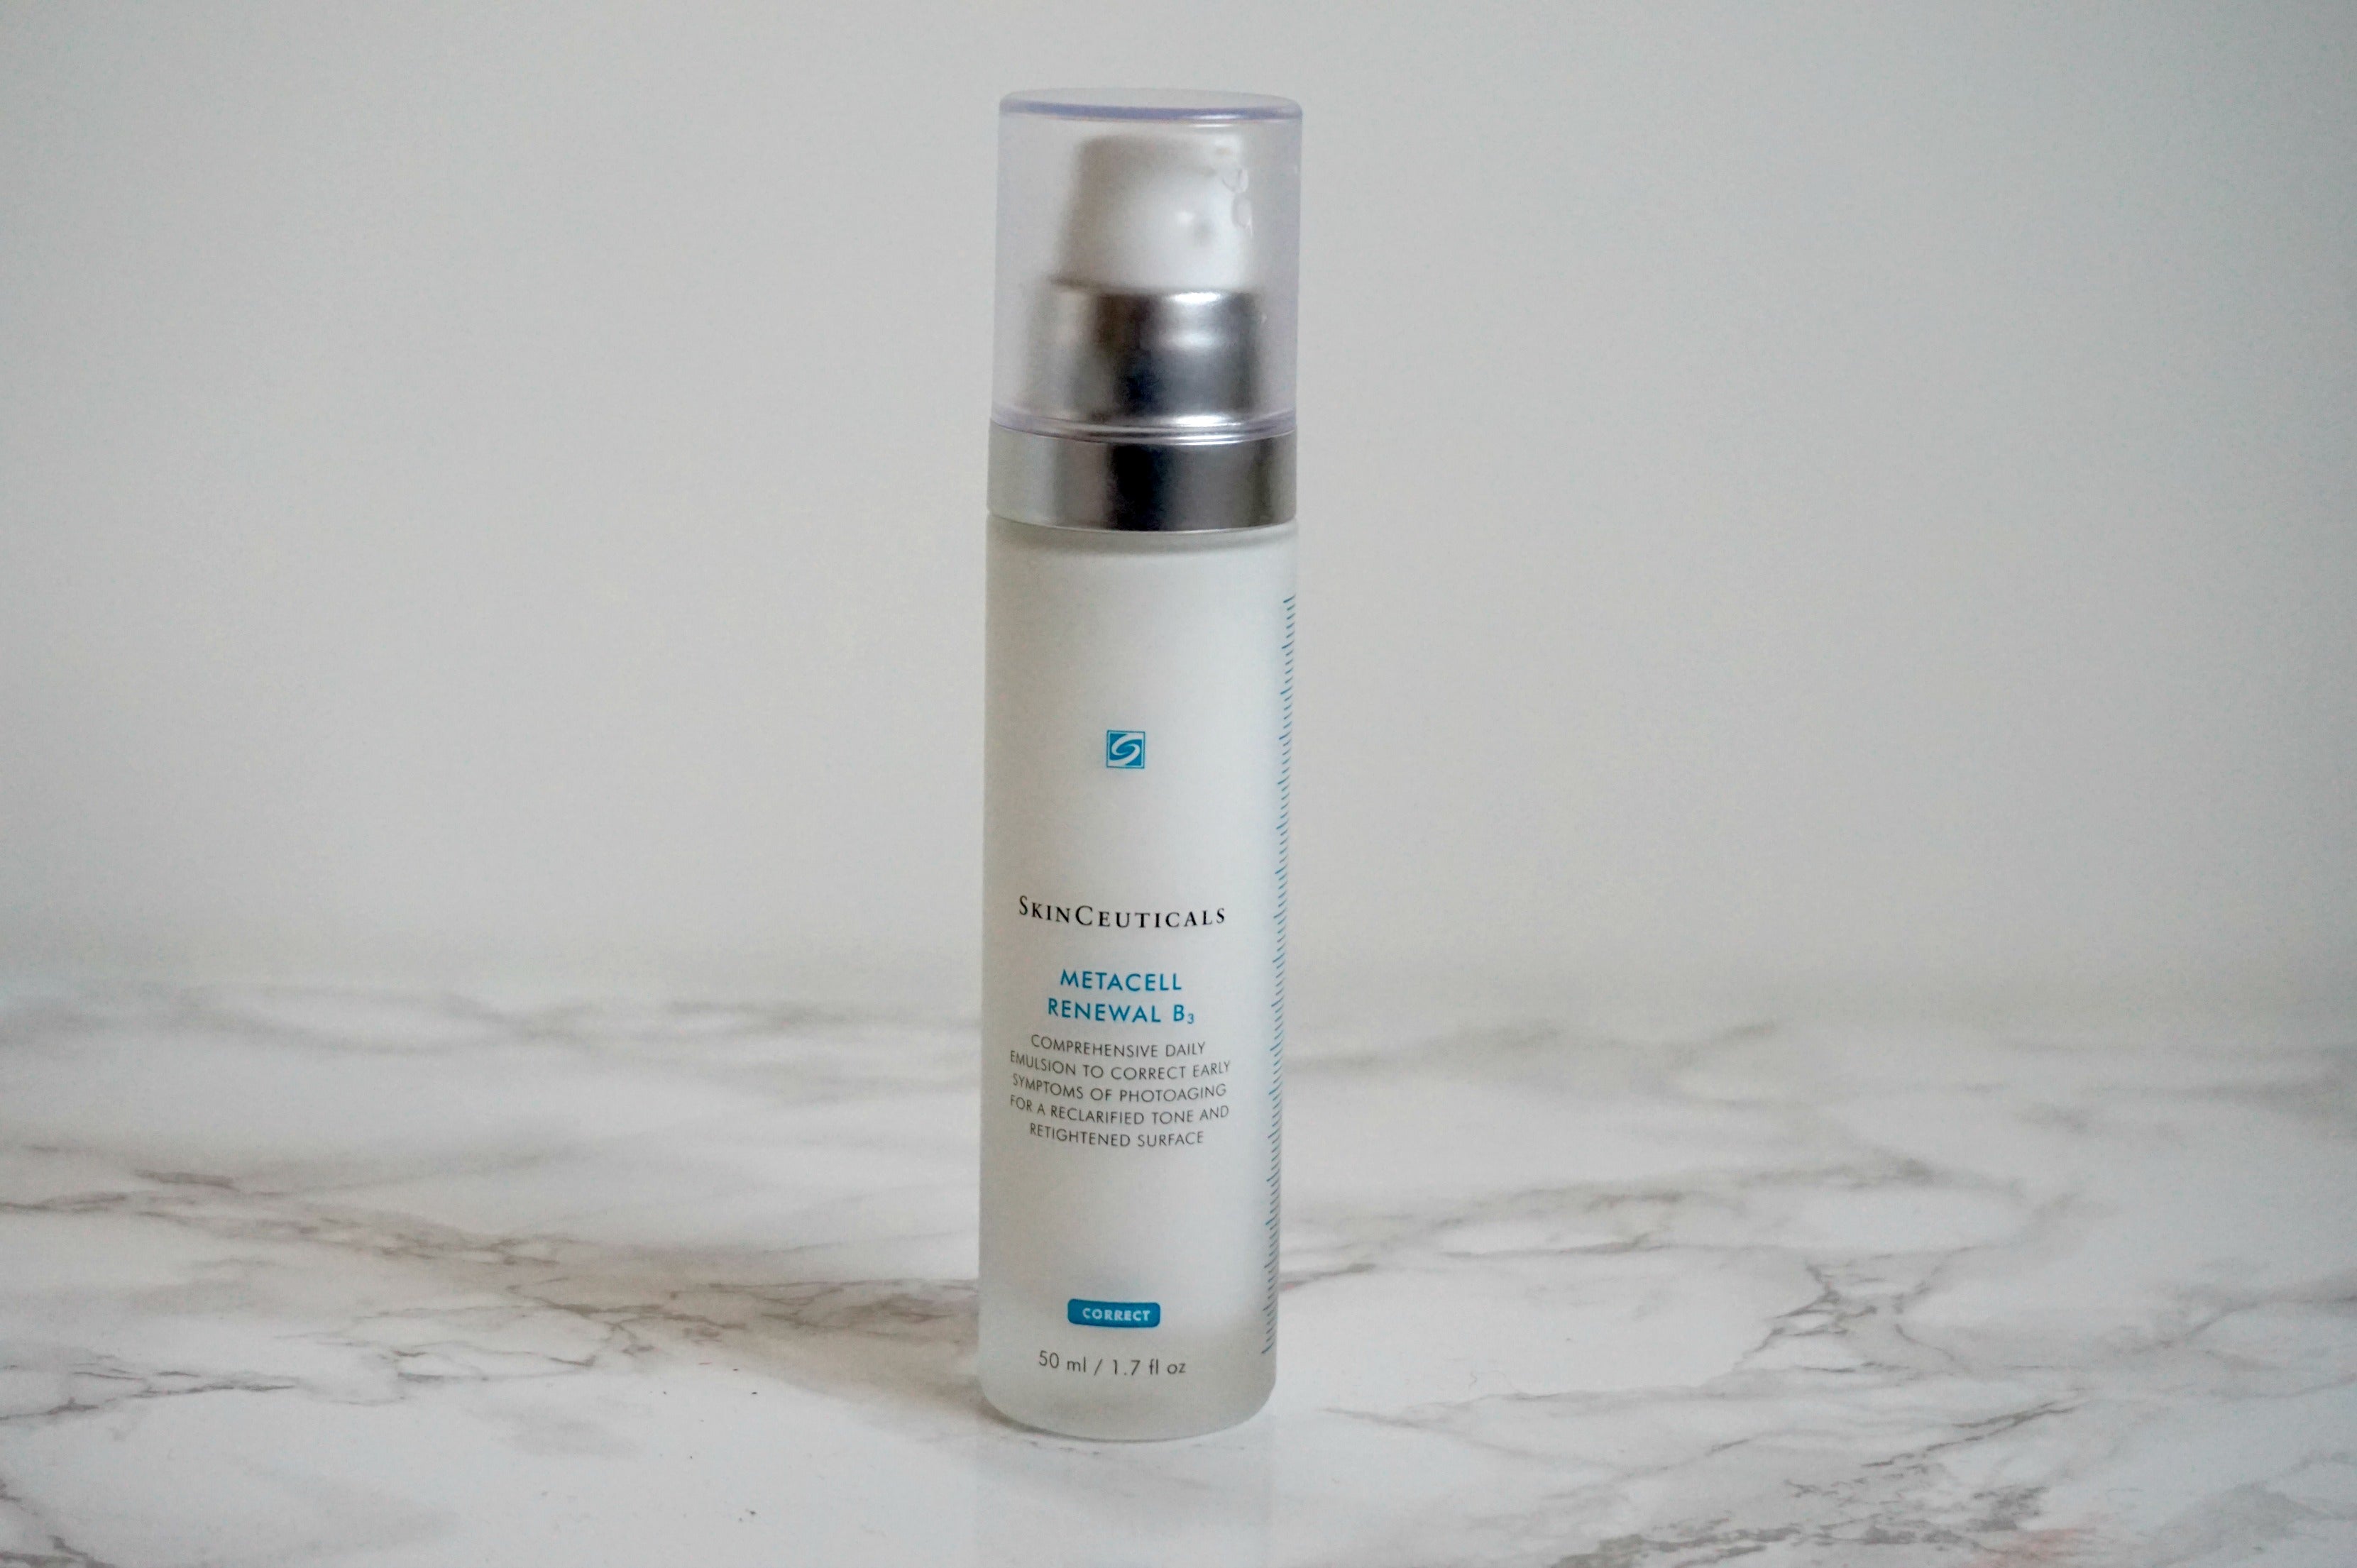 SkinCeuticals Metacell Renewall B3 50 ml